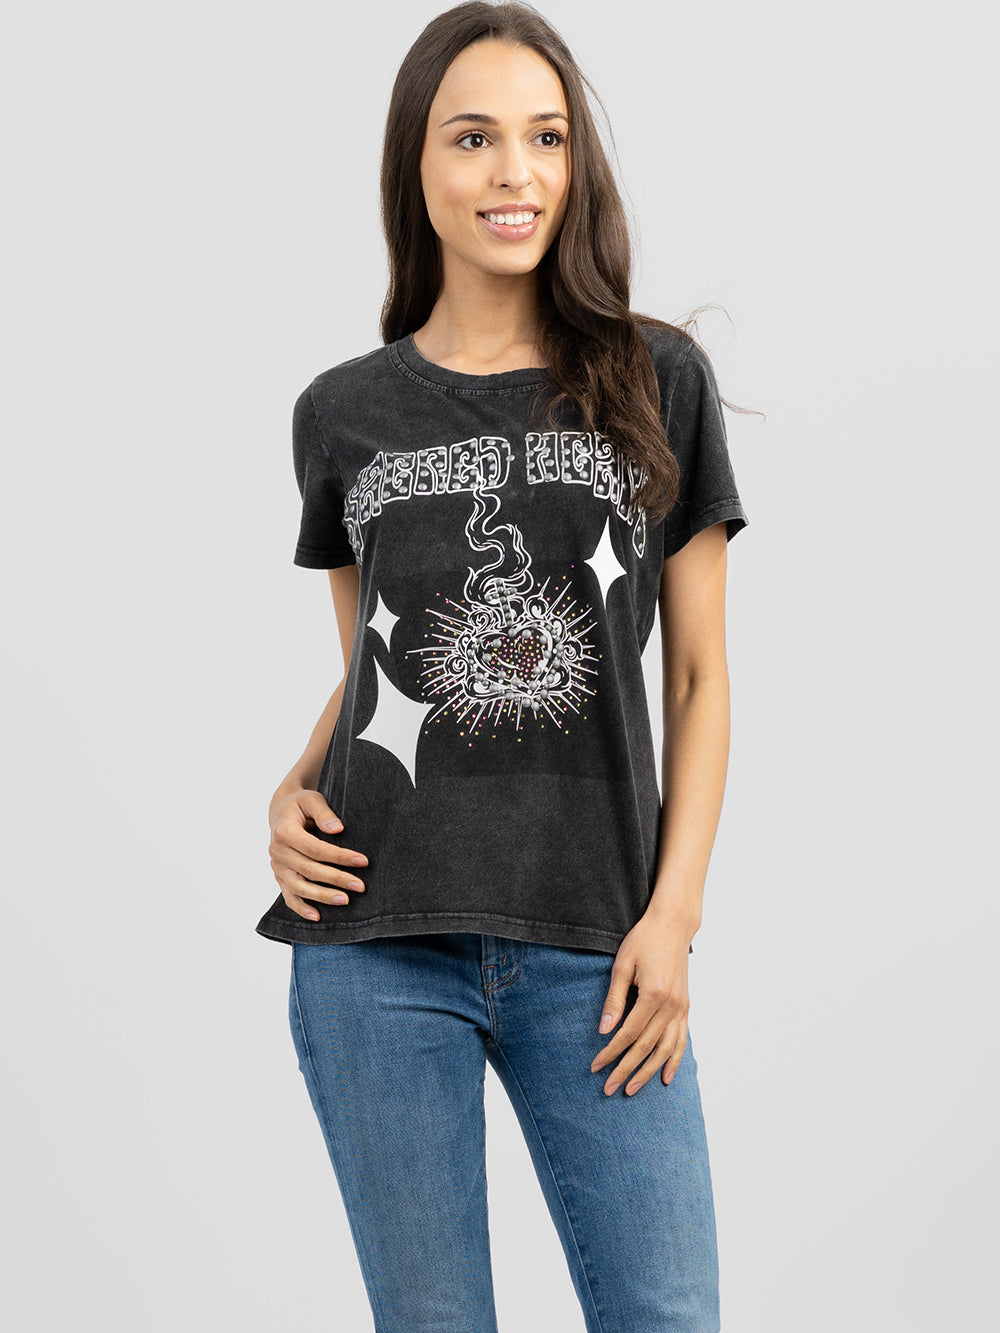 Women's Mineral Wash Sacred Hgart Graphic Short Sleeve Tee - Cowgirl Wear